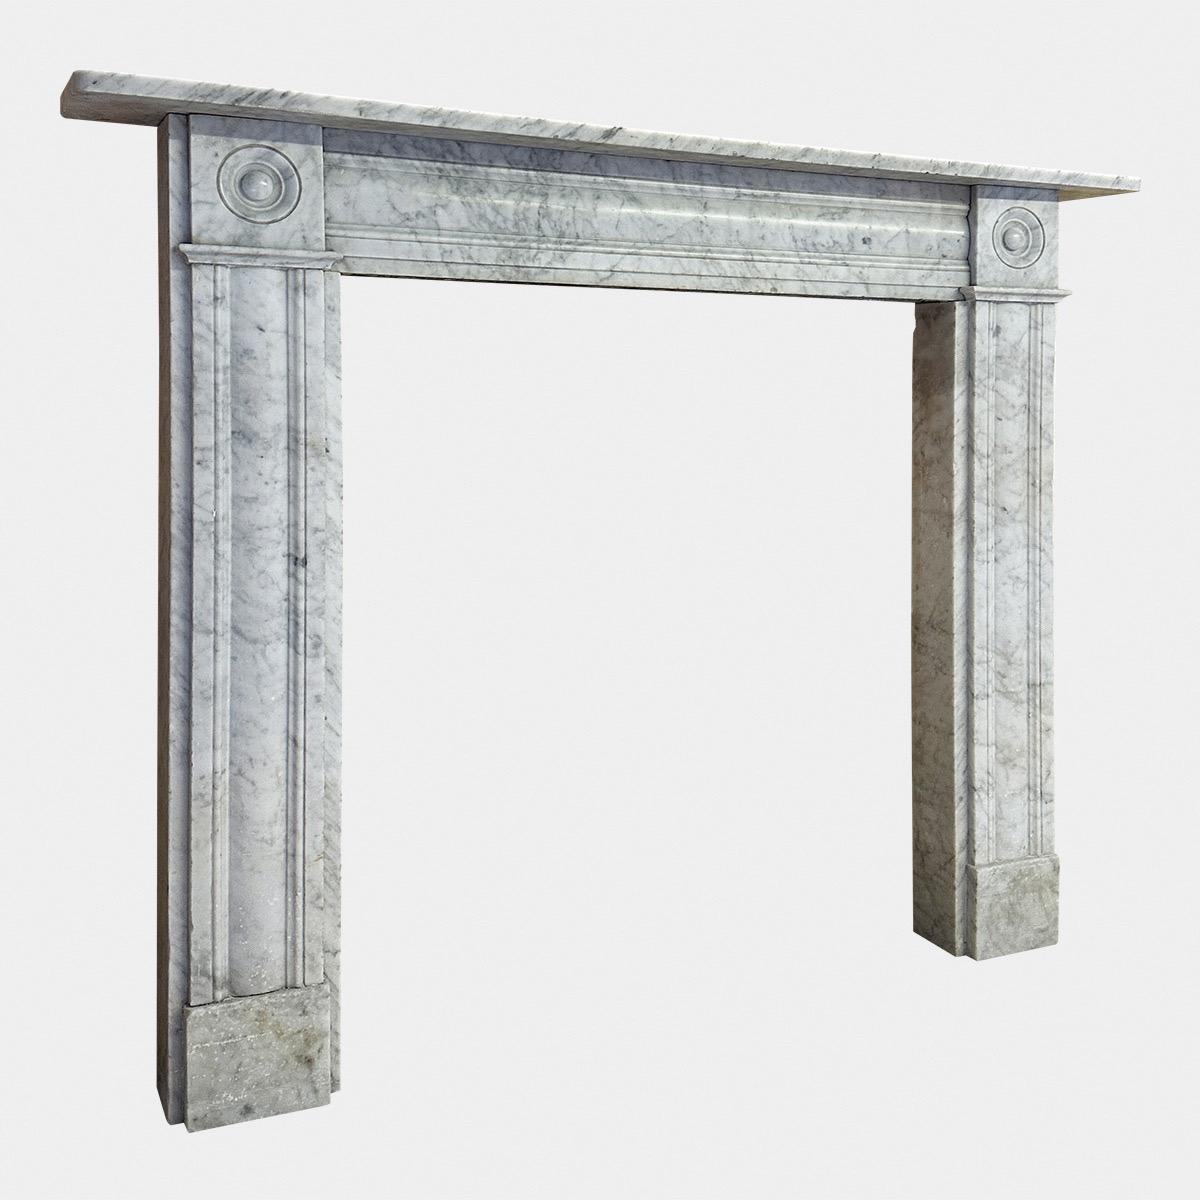 Hand-Carved An English Antique Regency Period Carrara Marble Fireplace Mantel For Sale